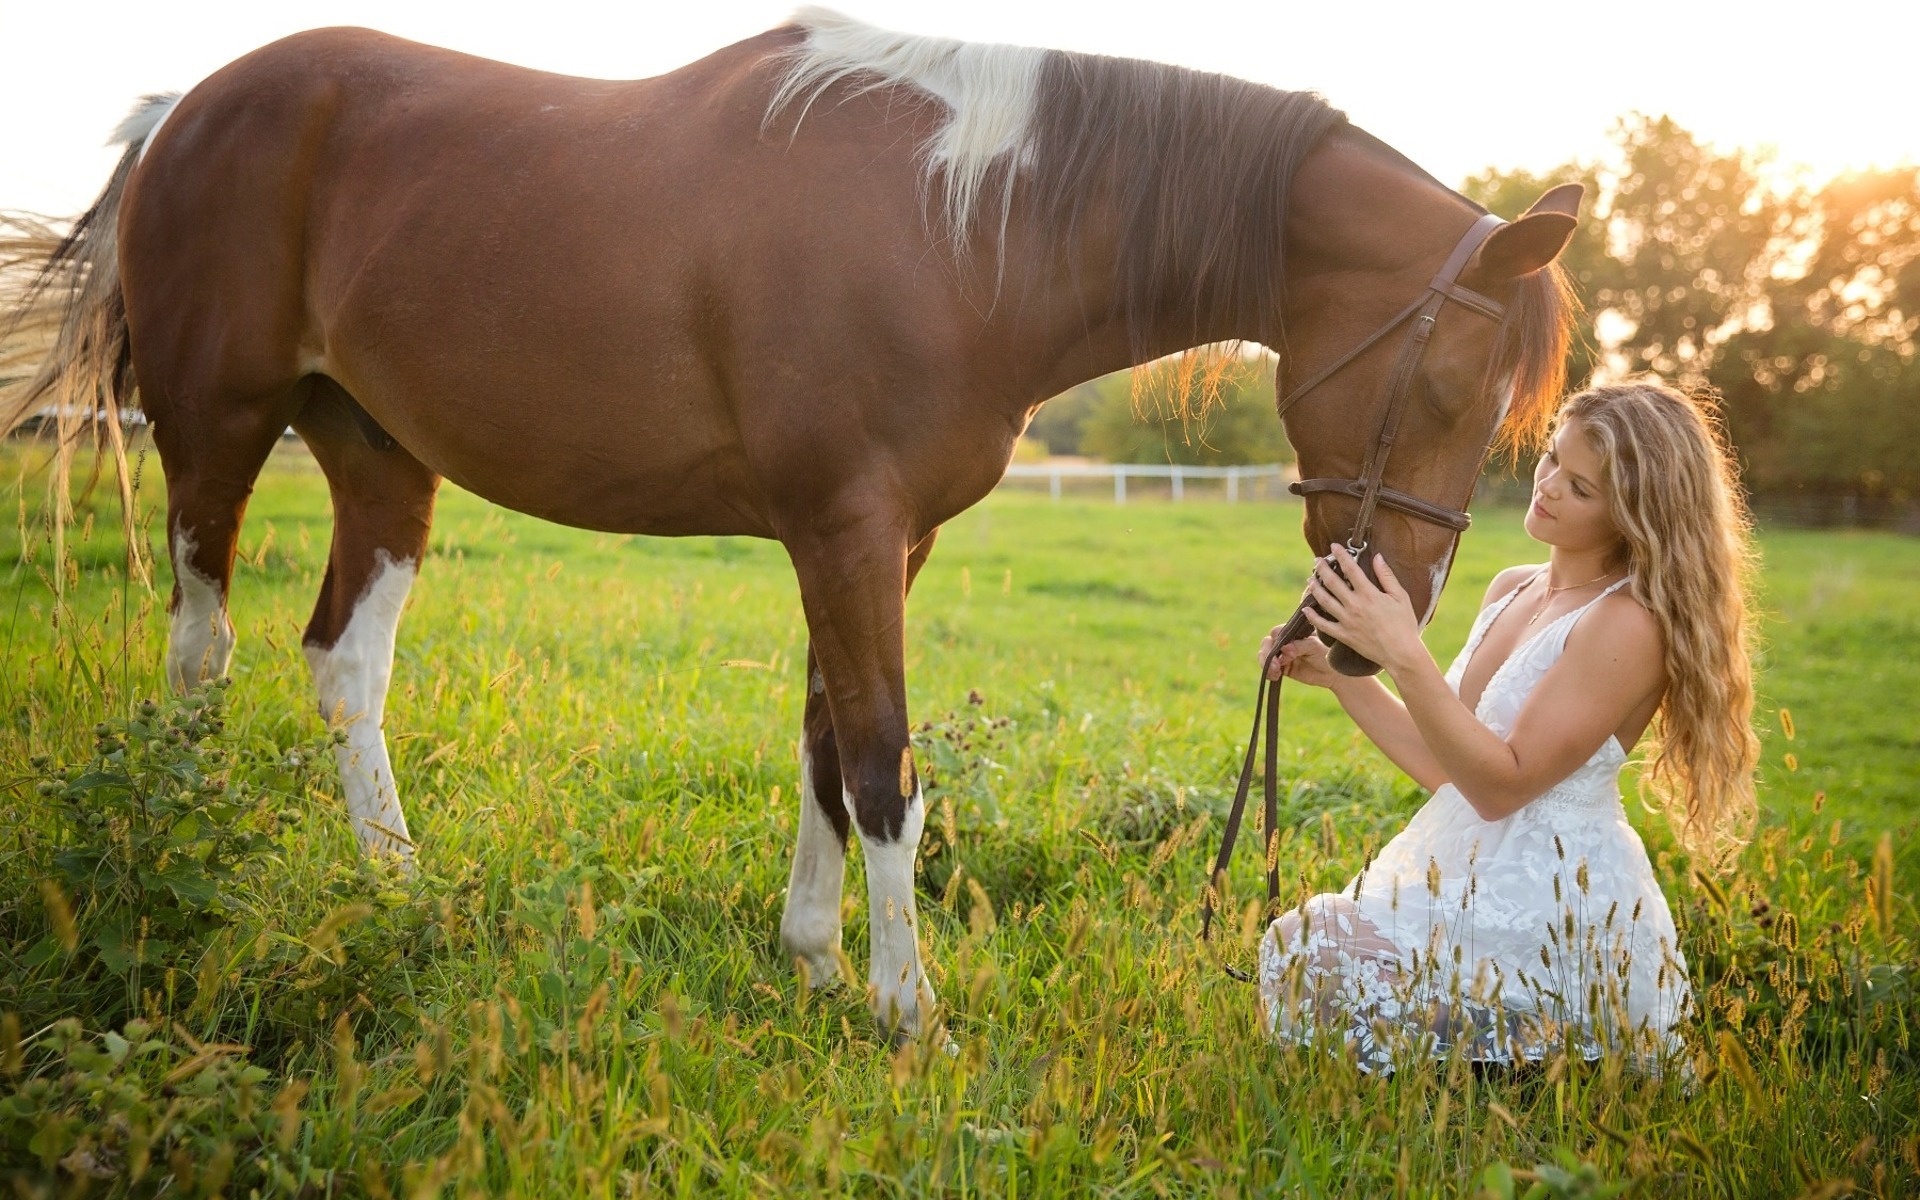 hs senior in a white dress looks at her brown horse